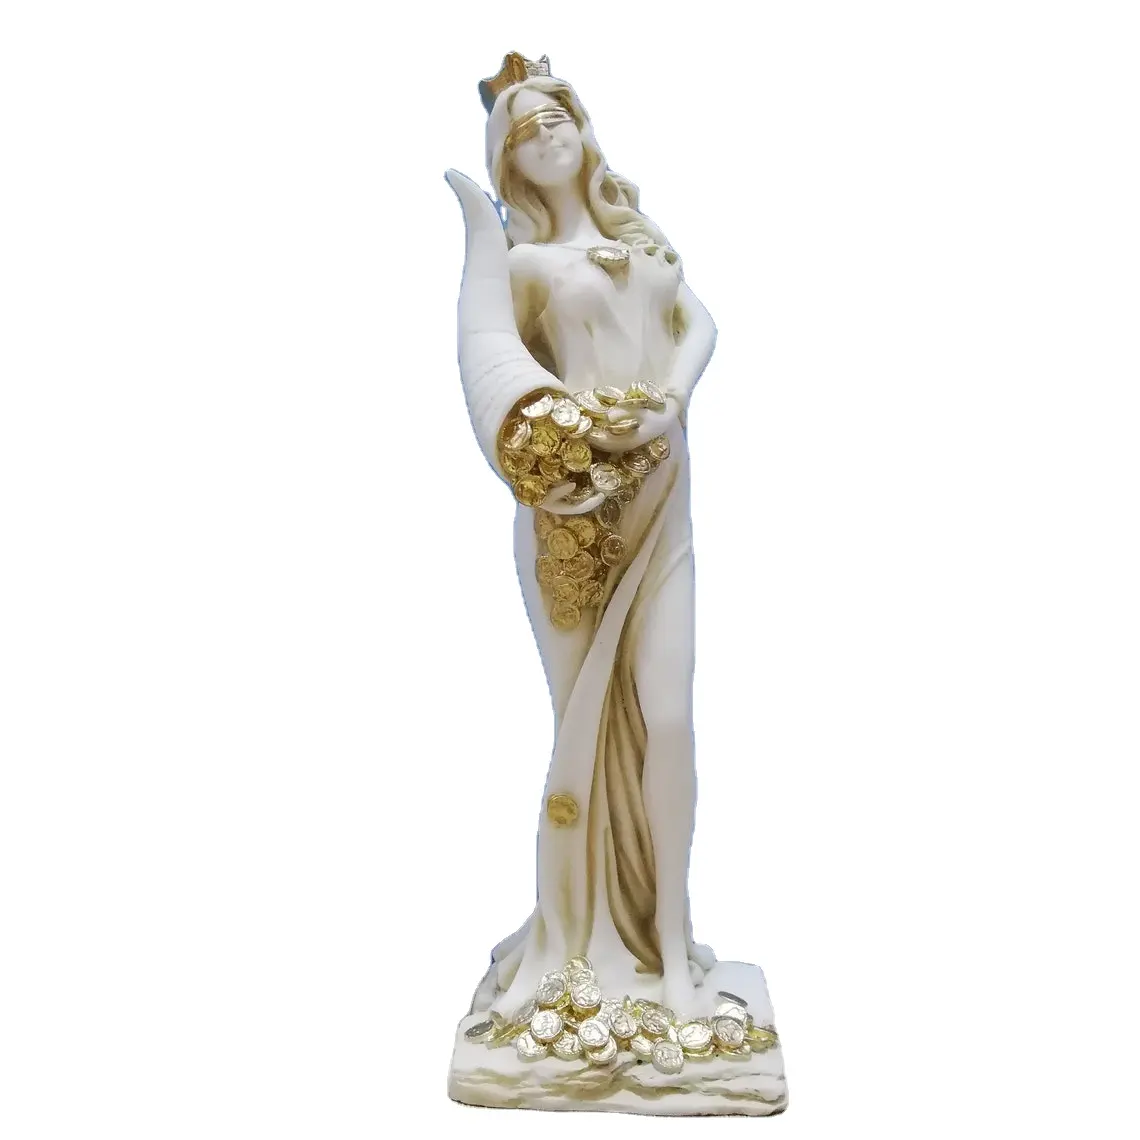 Fortunate Lucky Goddess Of Wealth Tyche Statue 29cm Greek Mythology White Resin Alabaster Handmade Sculpture in Greece Decor